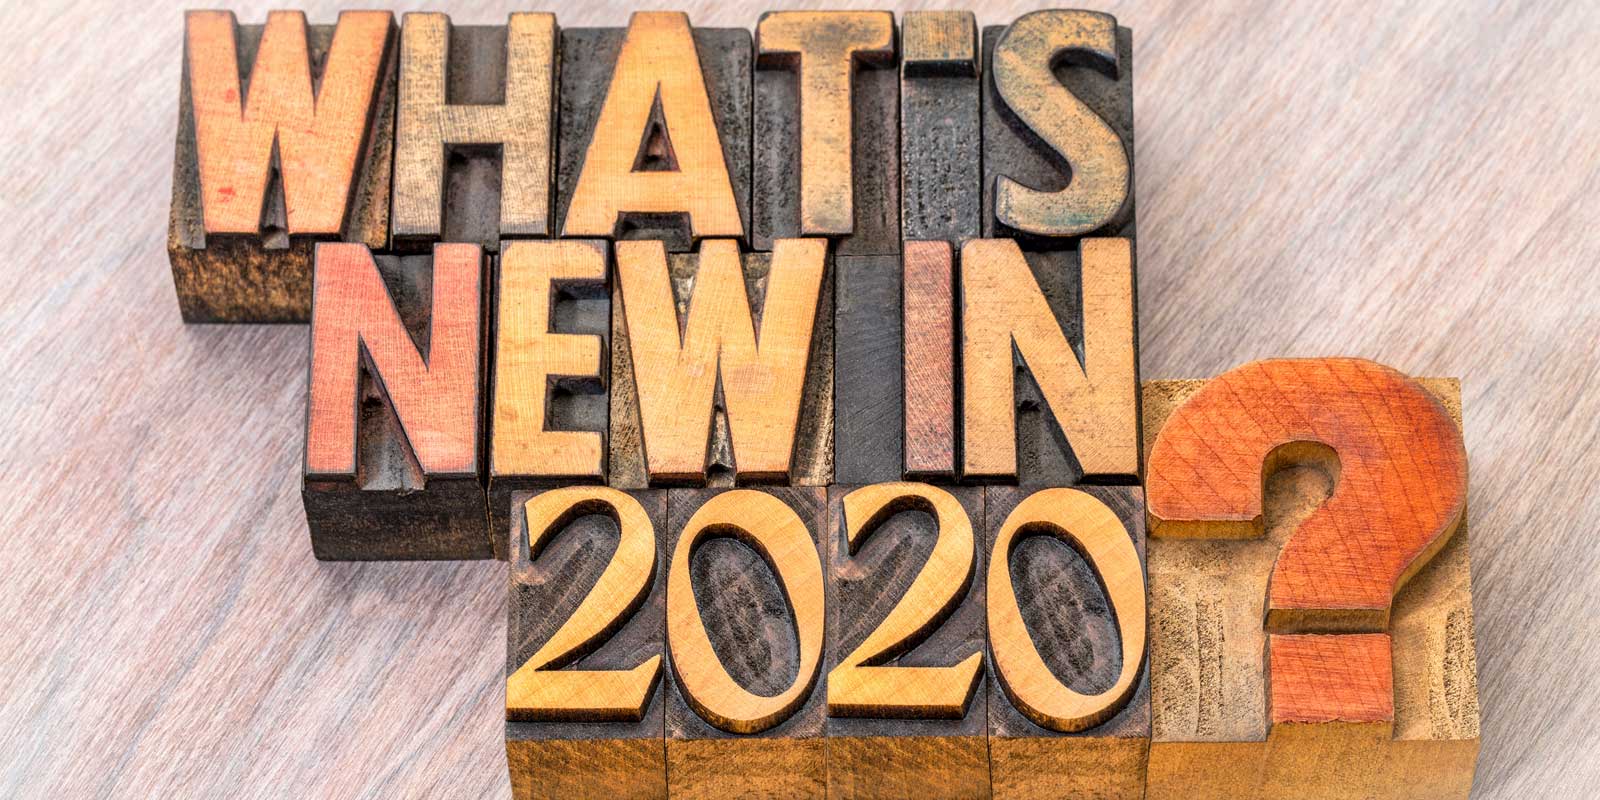 What's new in 2020